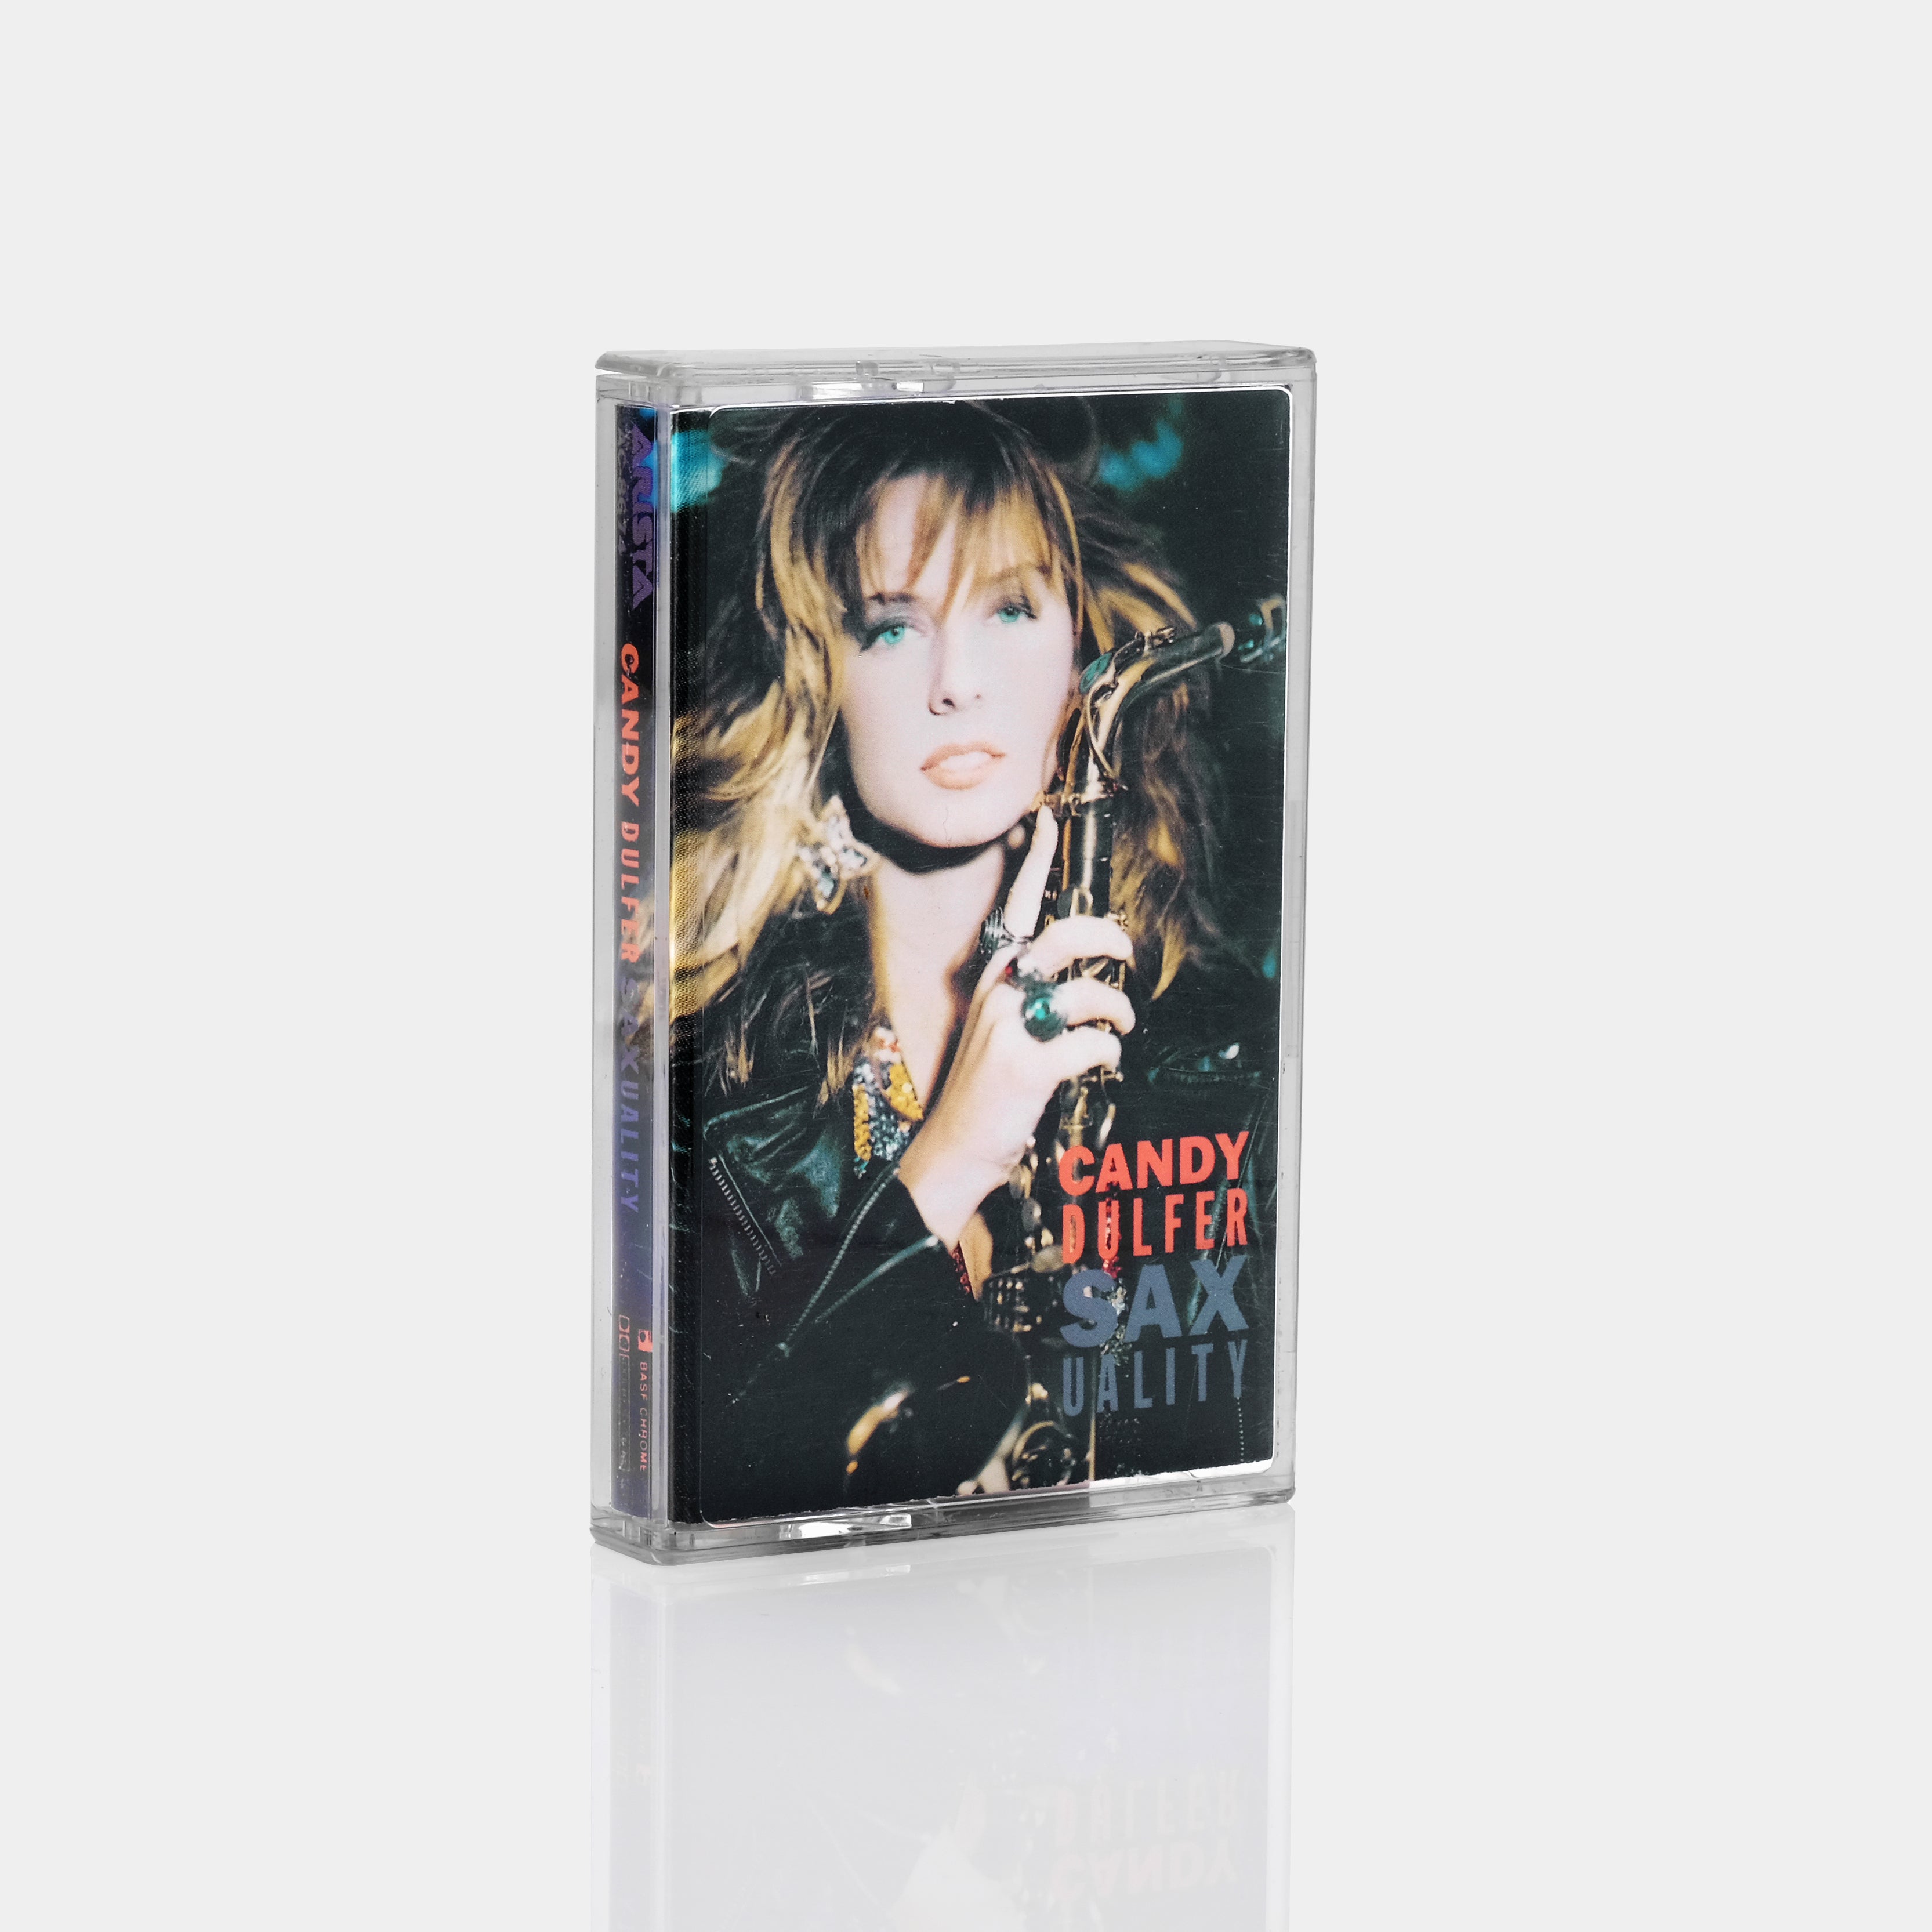 Candy Dulfer - Saxuality Cassette Tape